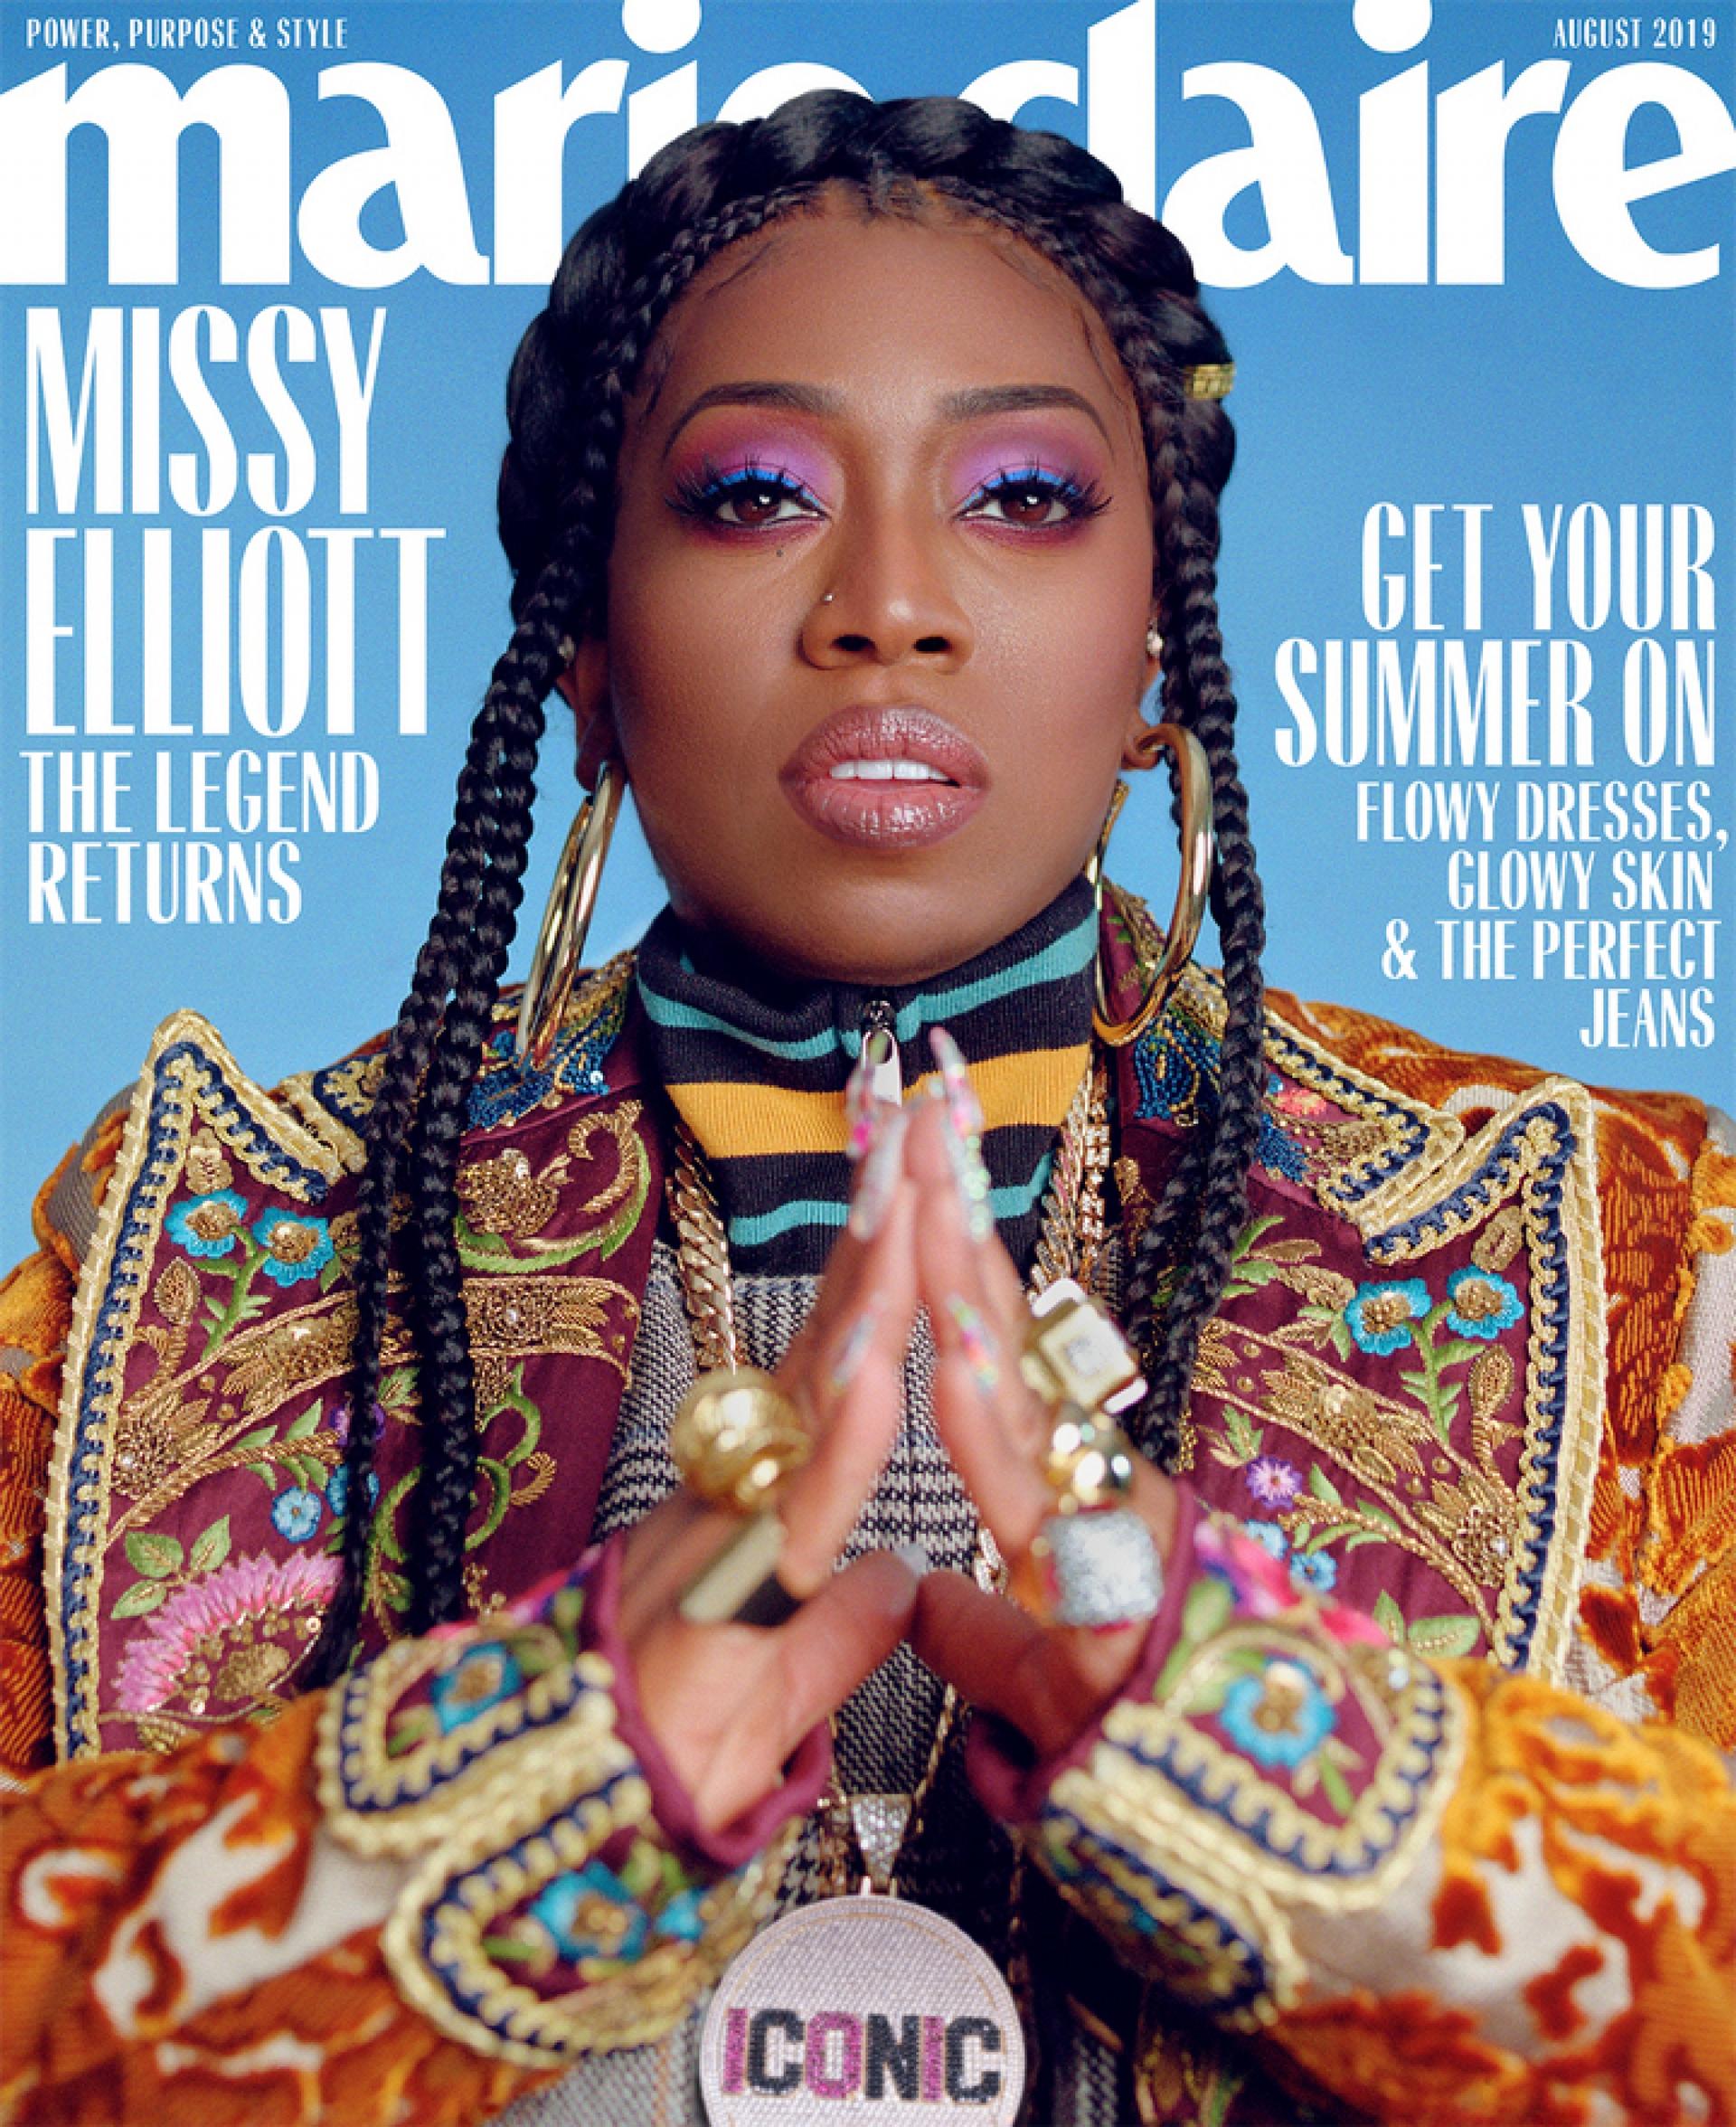 The August 2019 cover of Marie Claire.